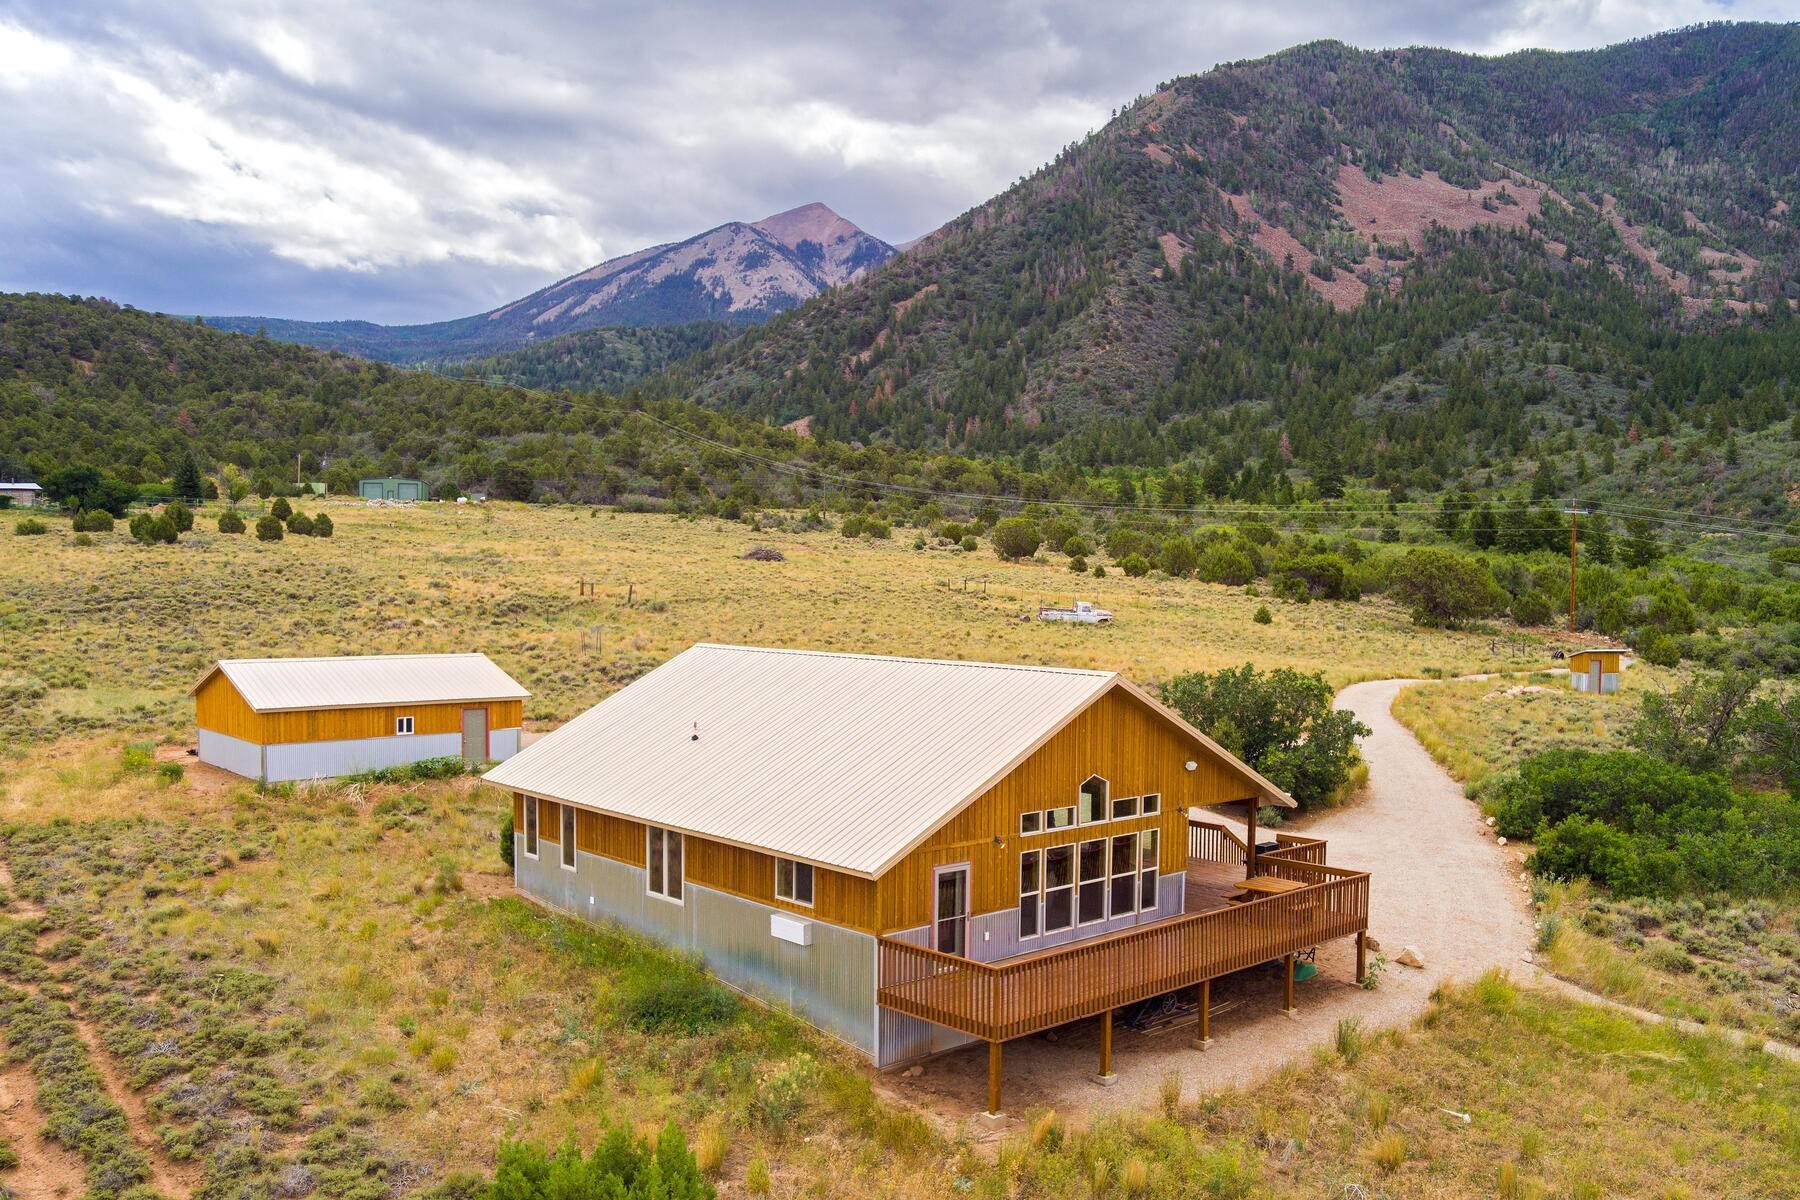 Single Family Homes for Sale at Seize This Rare Opportunity to Own Your Own Slice of Heaven 877 Gateway Road Moab, Utah 84532 United States